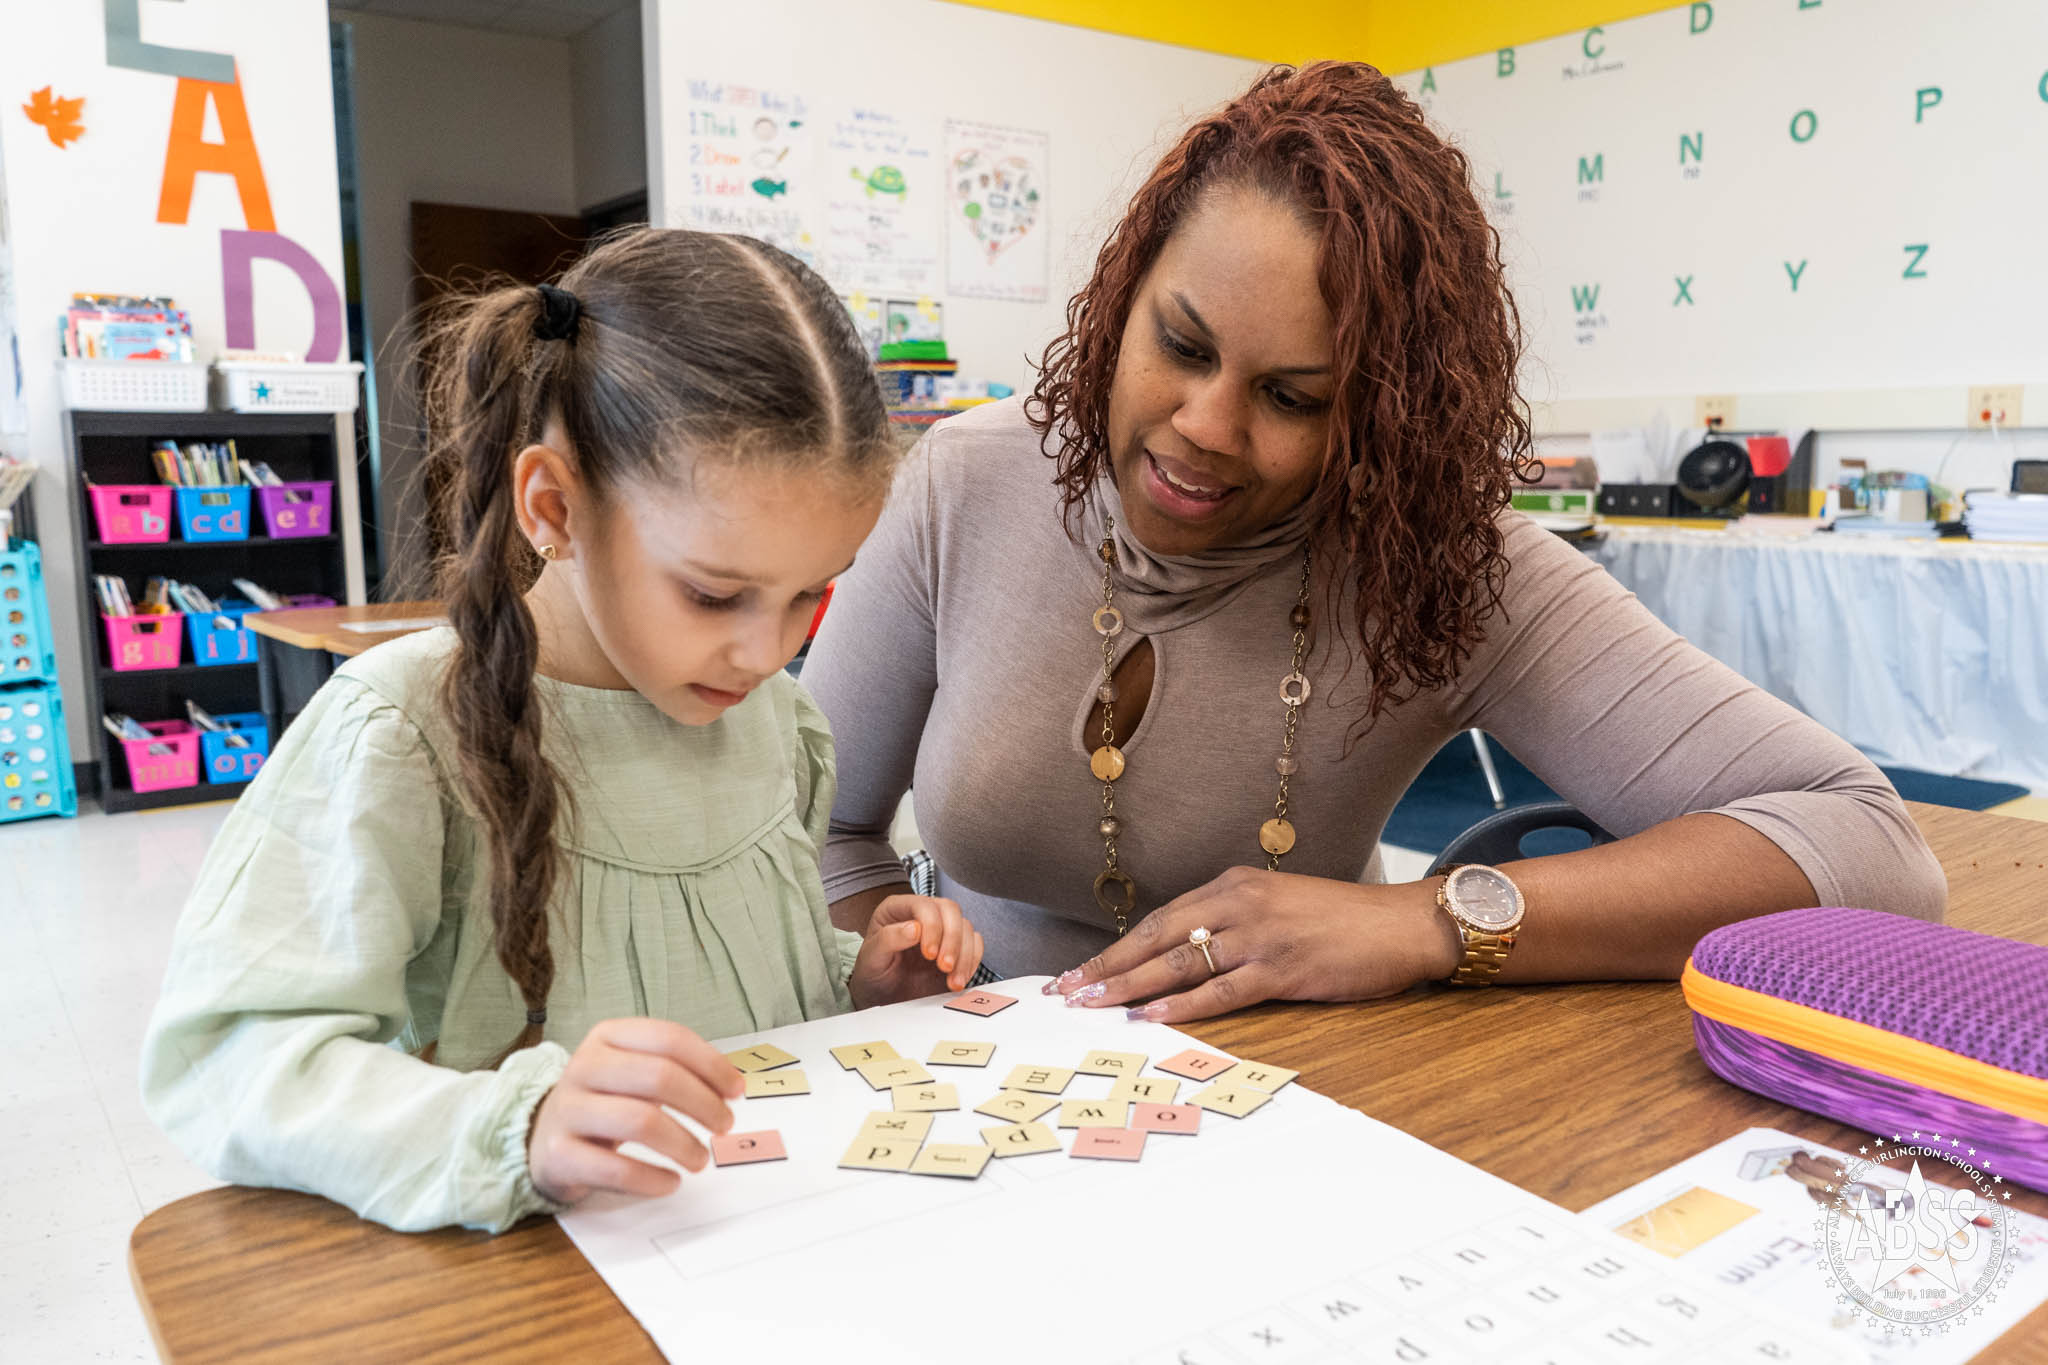 An elementary teacher sits beside a student in a green sweater as she assembles word tiles on a whiteboard